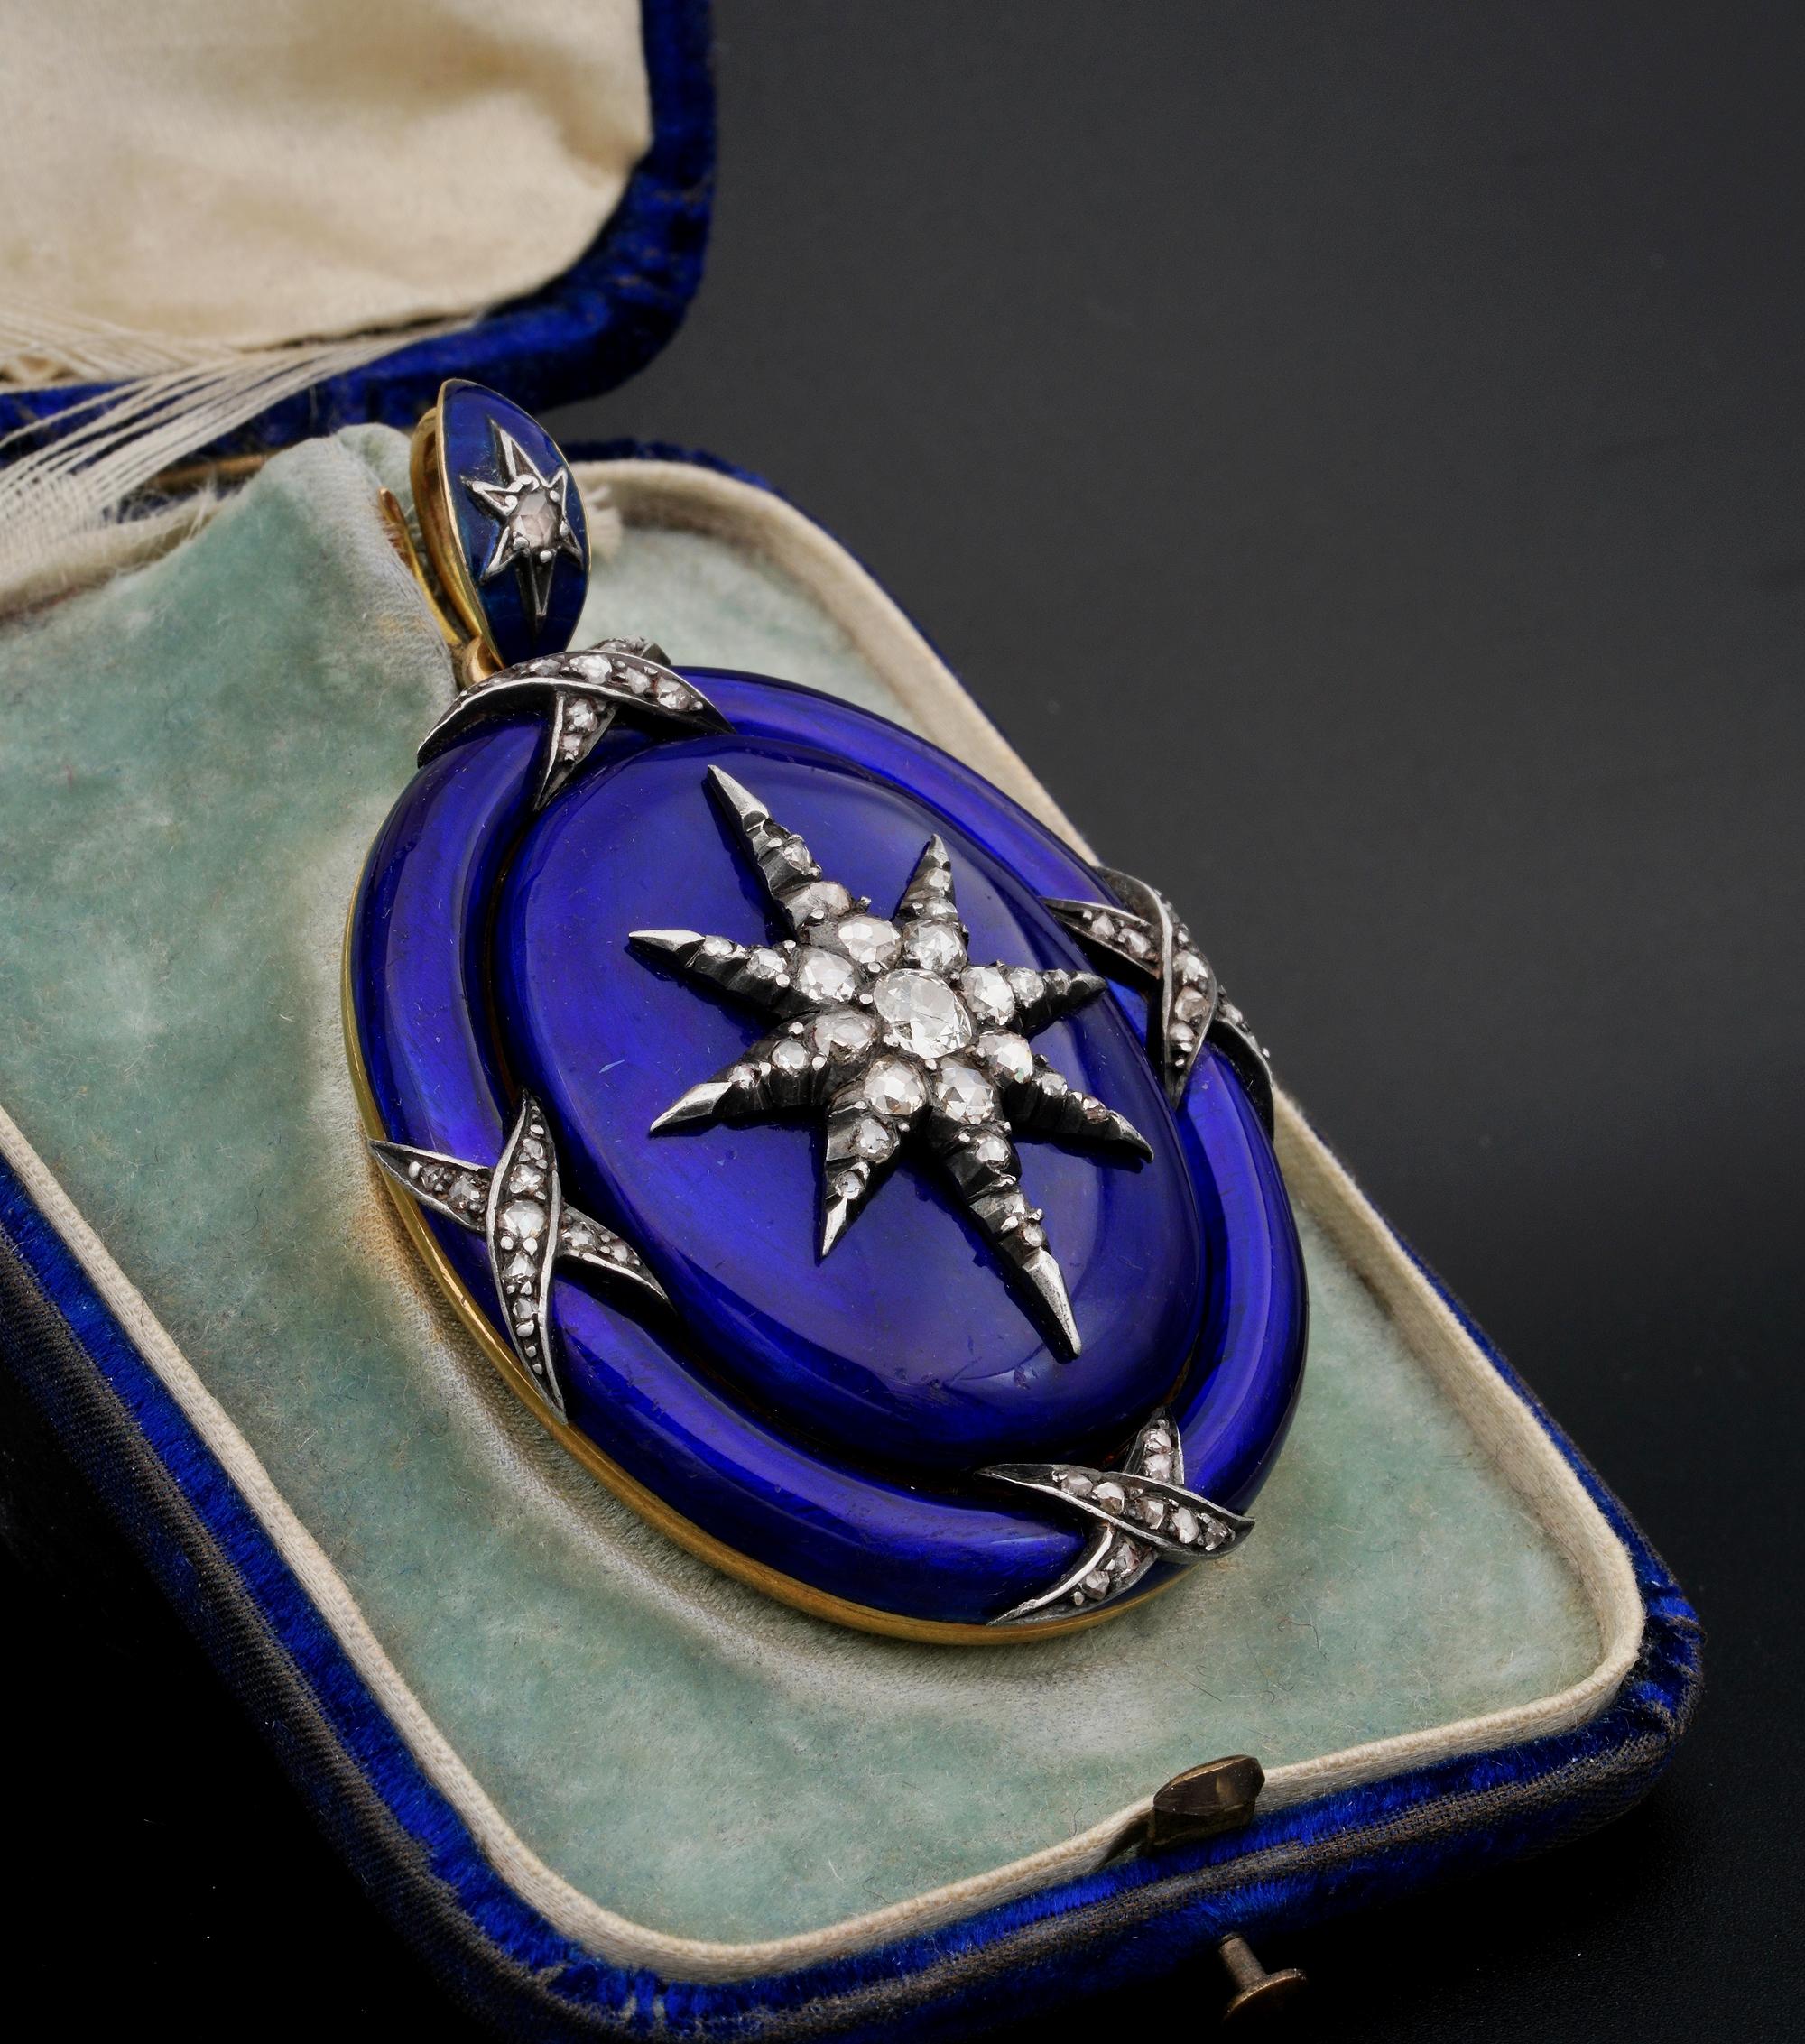 Secret keeper

An impressive large size Georgian period Diamond locket, rare for age , quality and size – 1800 ca
Georgian jewellery is rare and sought after, thought to be the most beautiful craftsmanship ever created
This outstanding example has